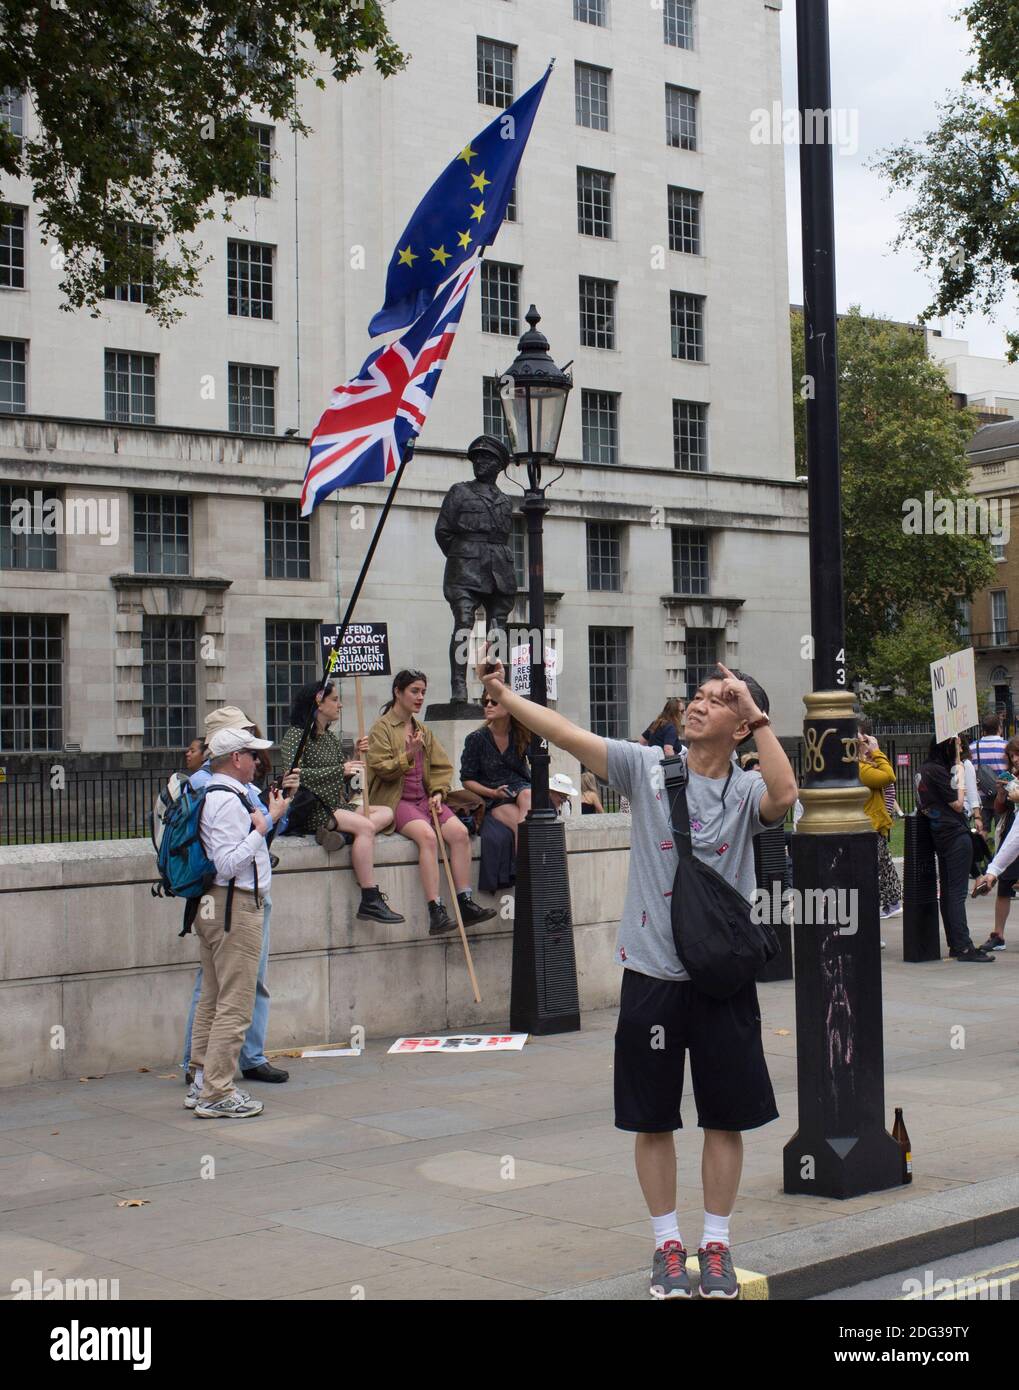 An anti Brexit protestor takes a selfie at a march Stock Photo